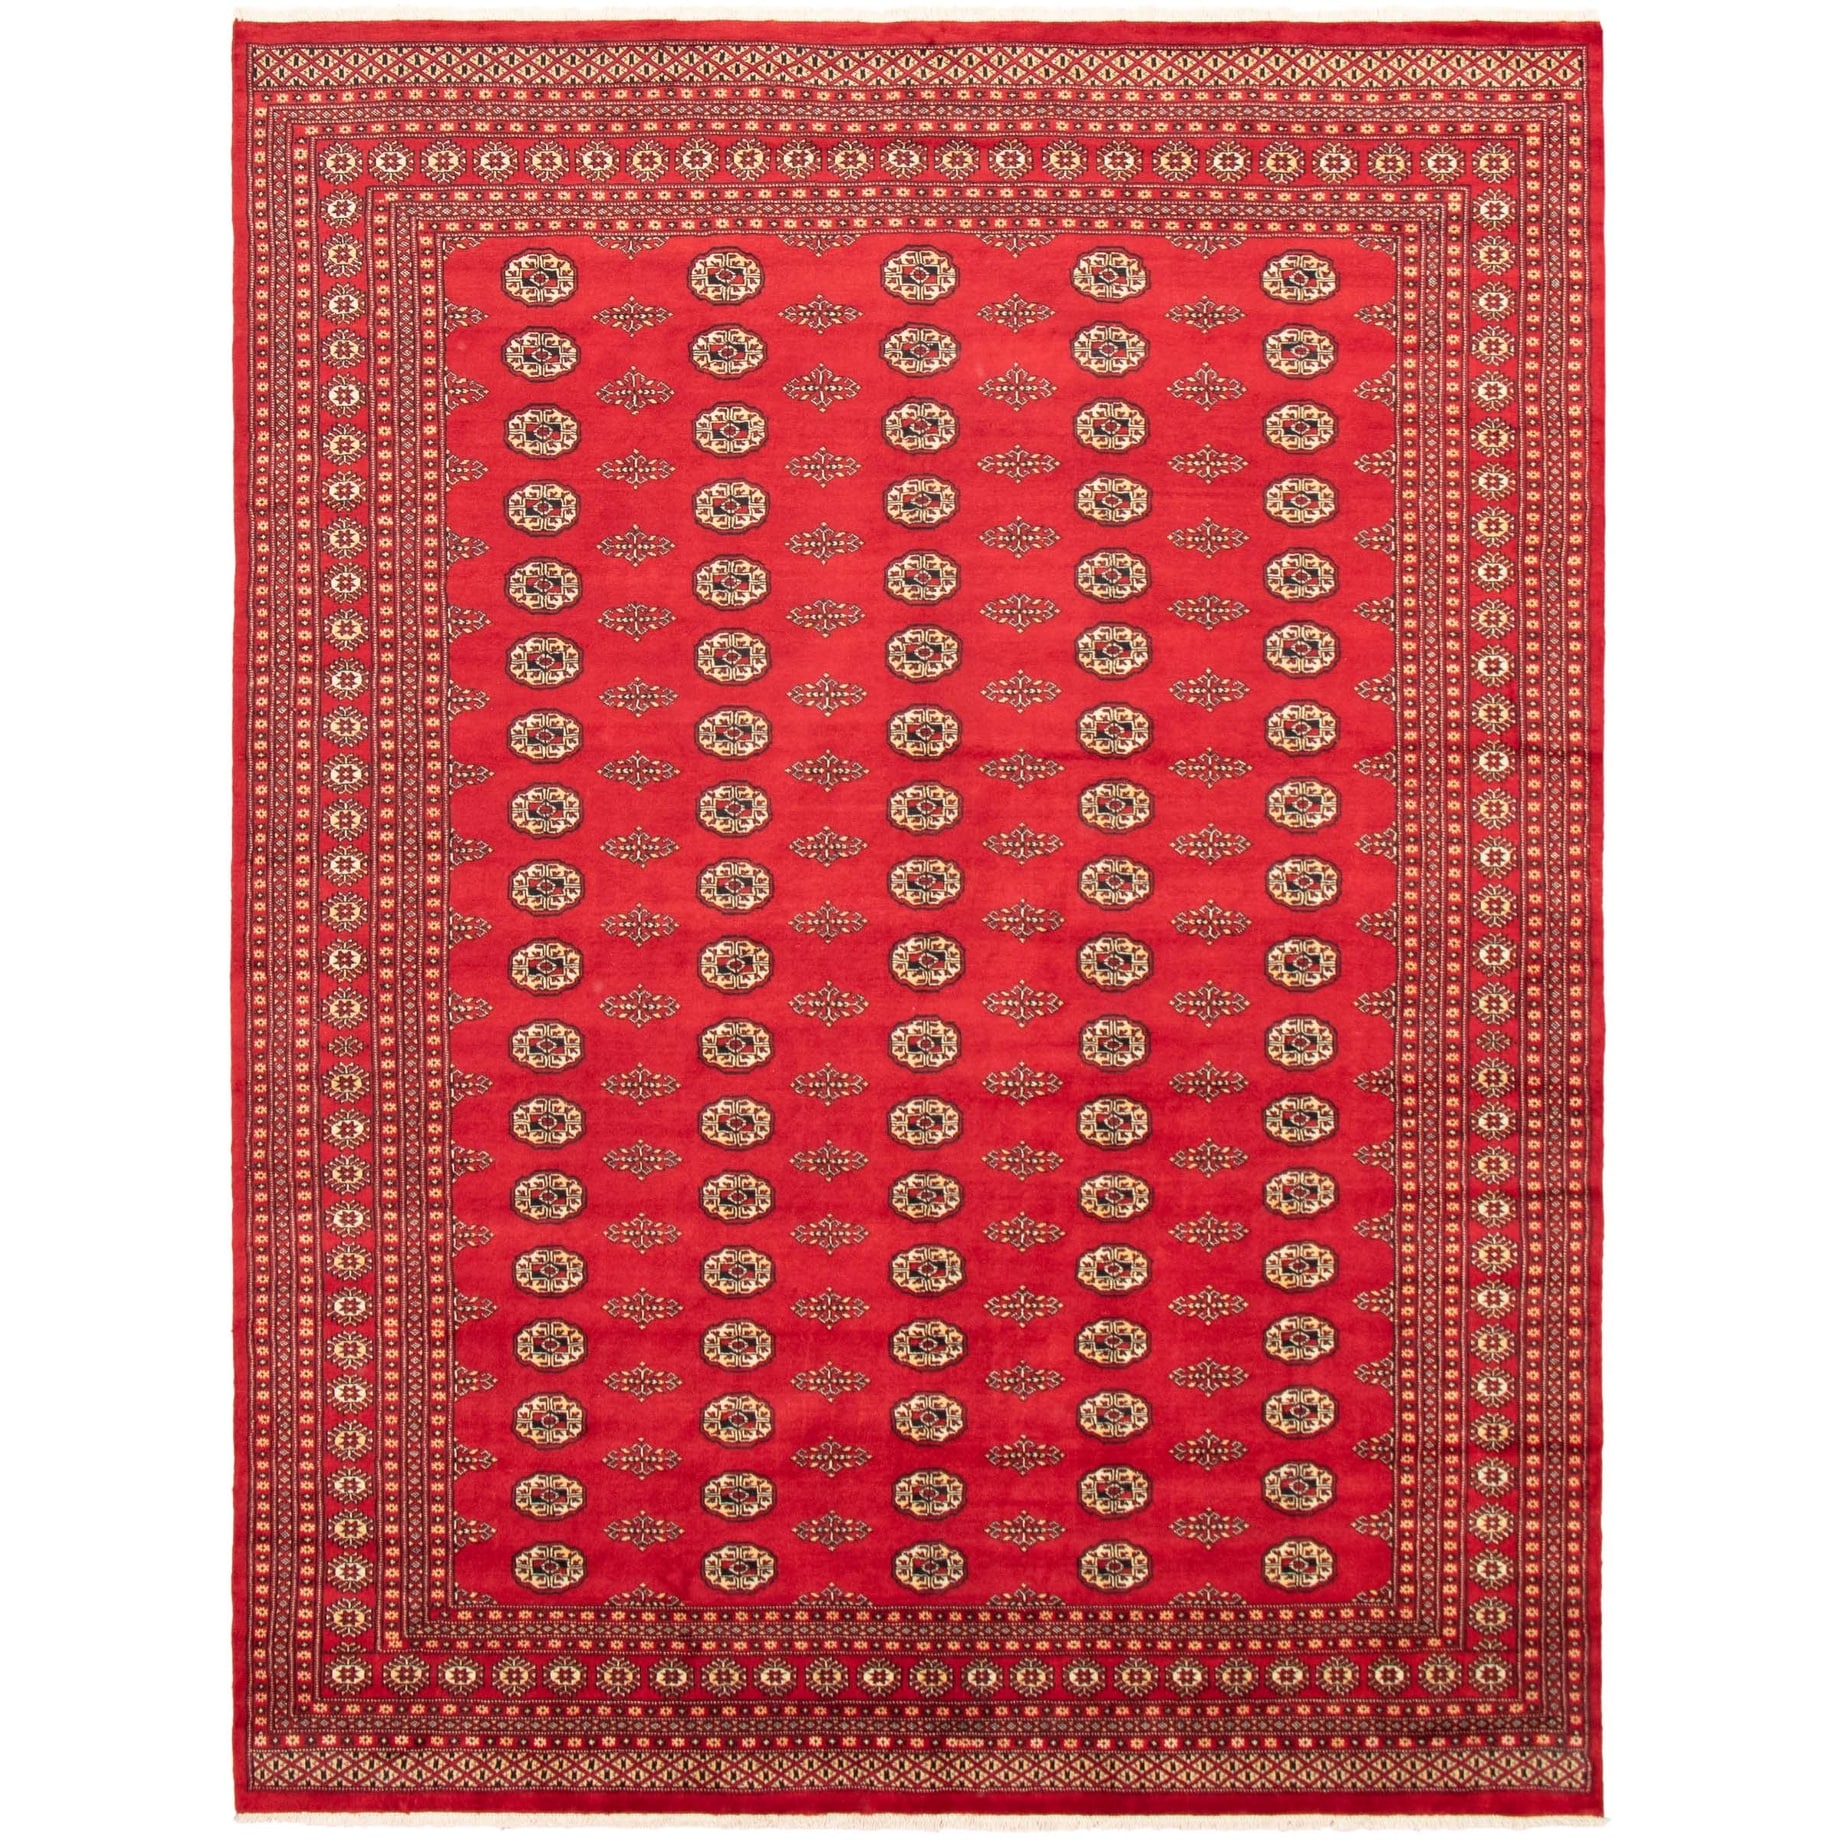 eCarpet Gallery Large Area Rug for Living Room 363161 Bedroom Finest Peshawar Bokhara Bordered Red Rug 8'11 x 12'0 Hand-Knotted Wool Rug 